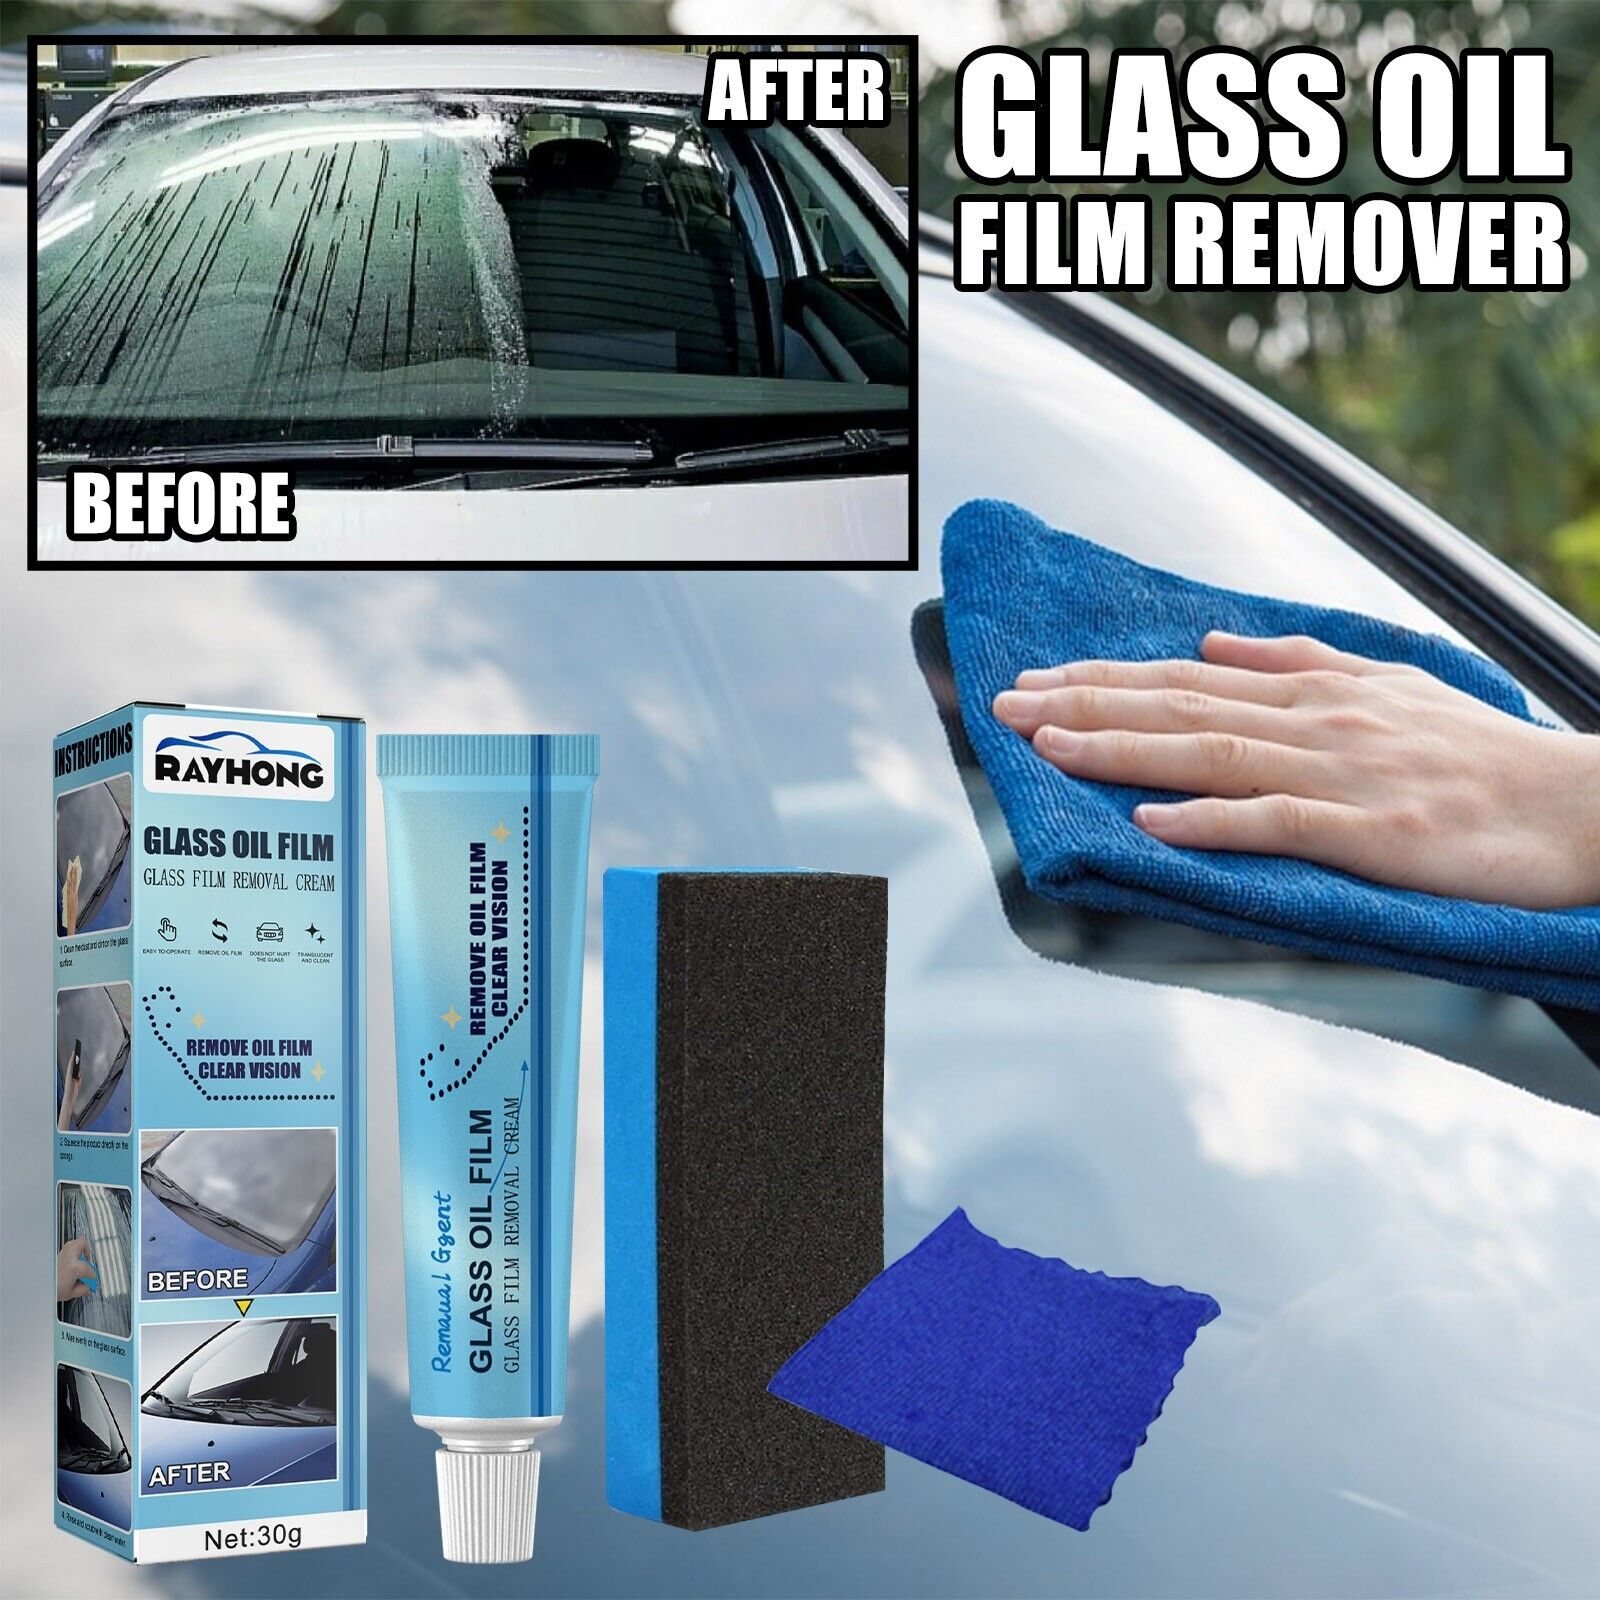 Car Glass Oil Film Cleaner Glass Film Removal Glass Oil Film Removing Paste Car